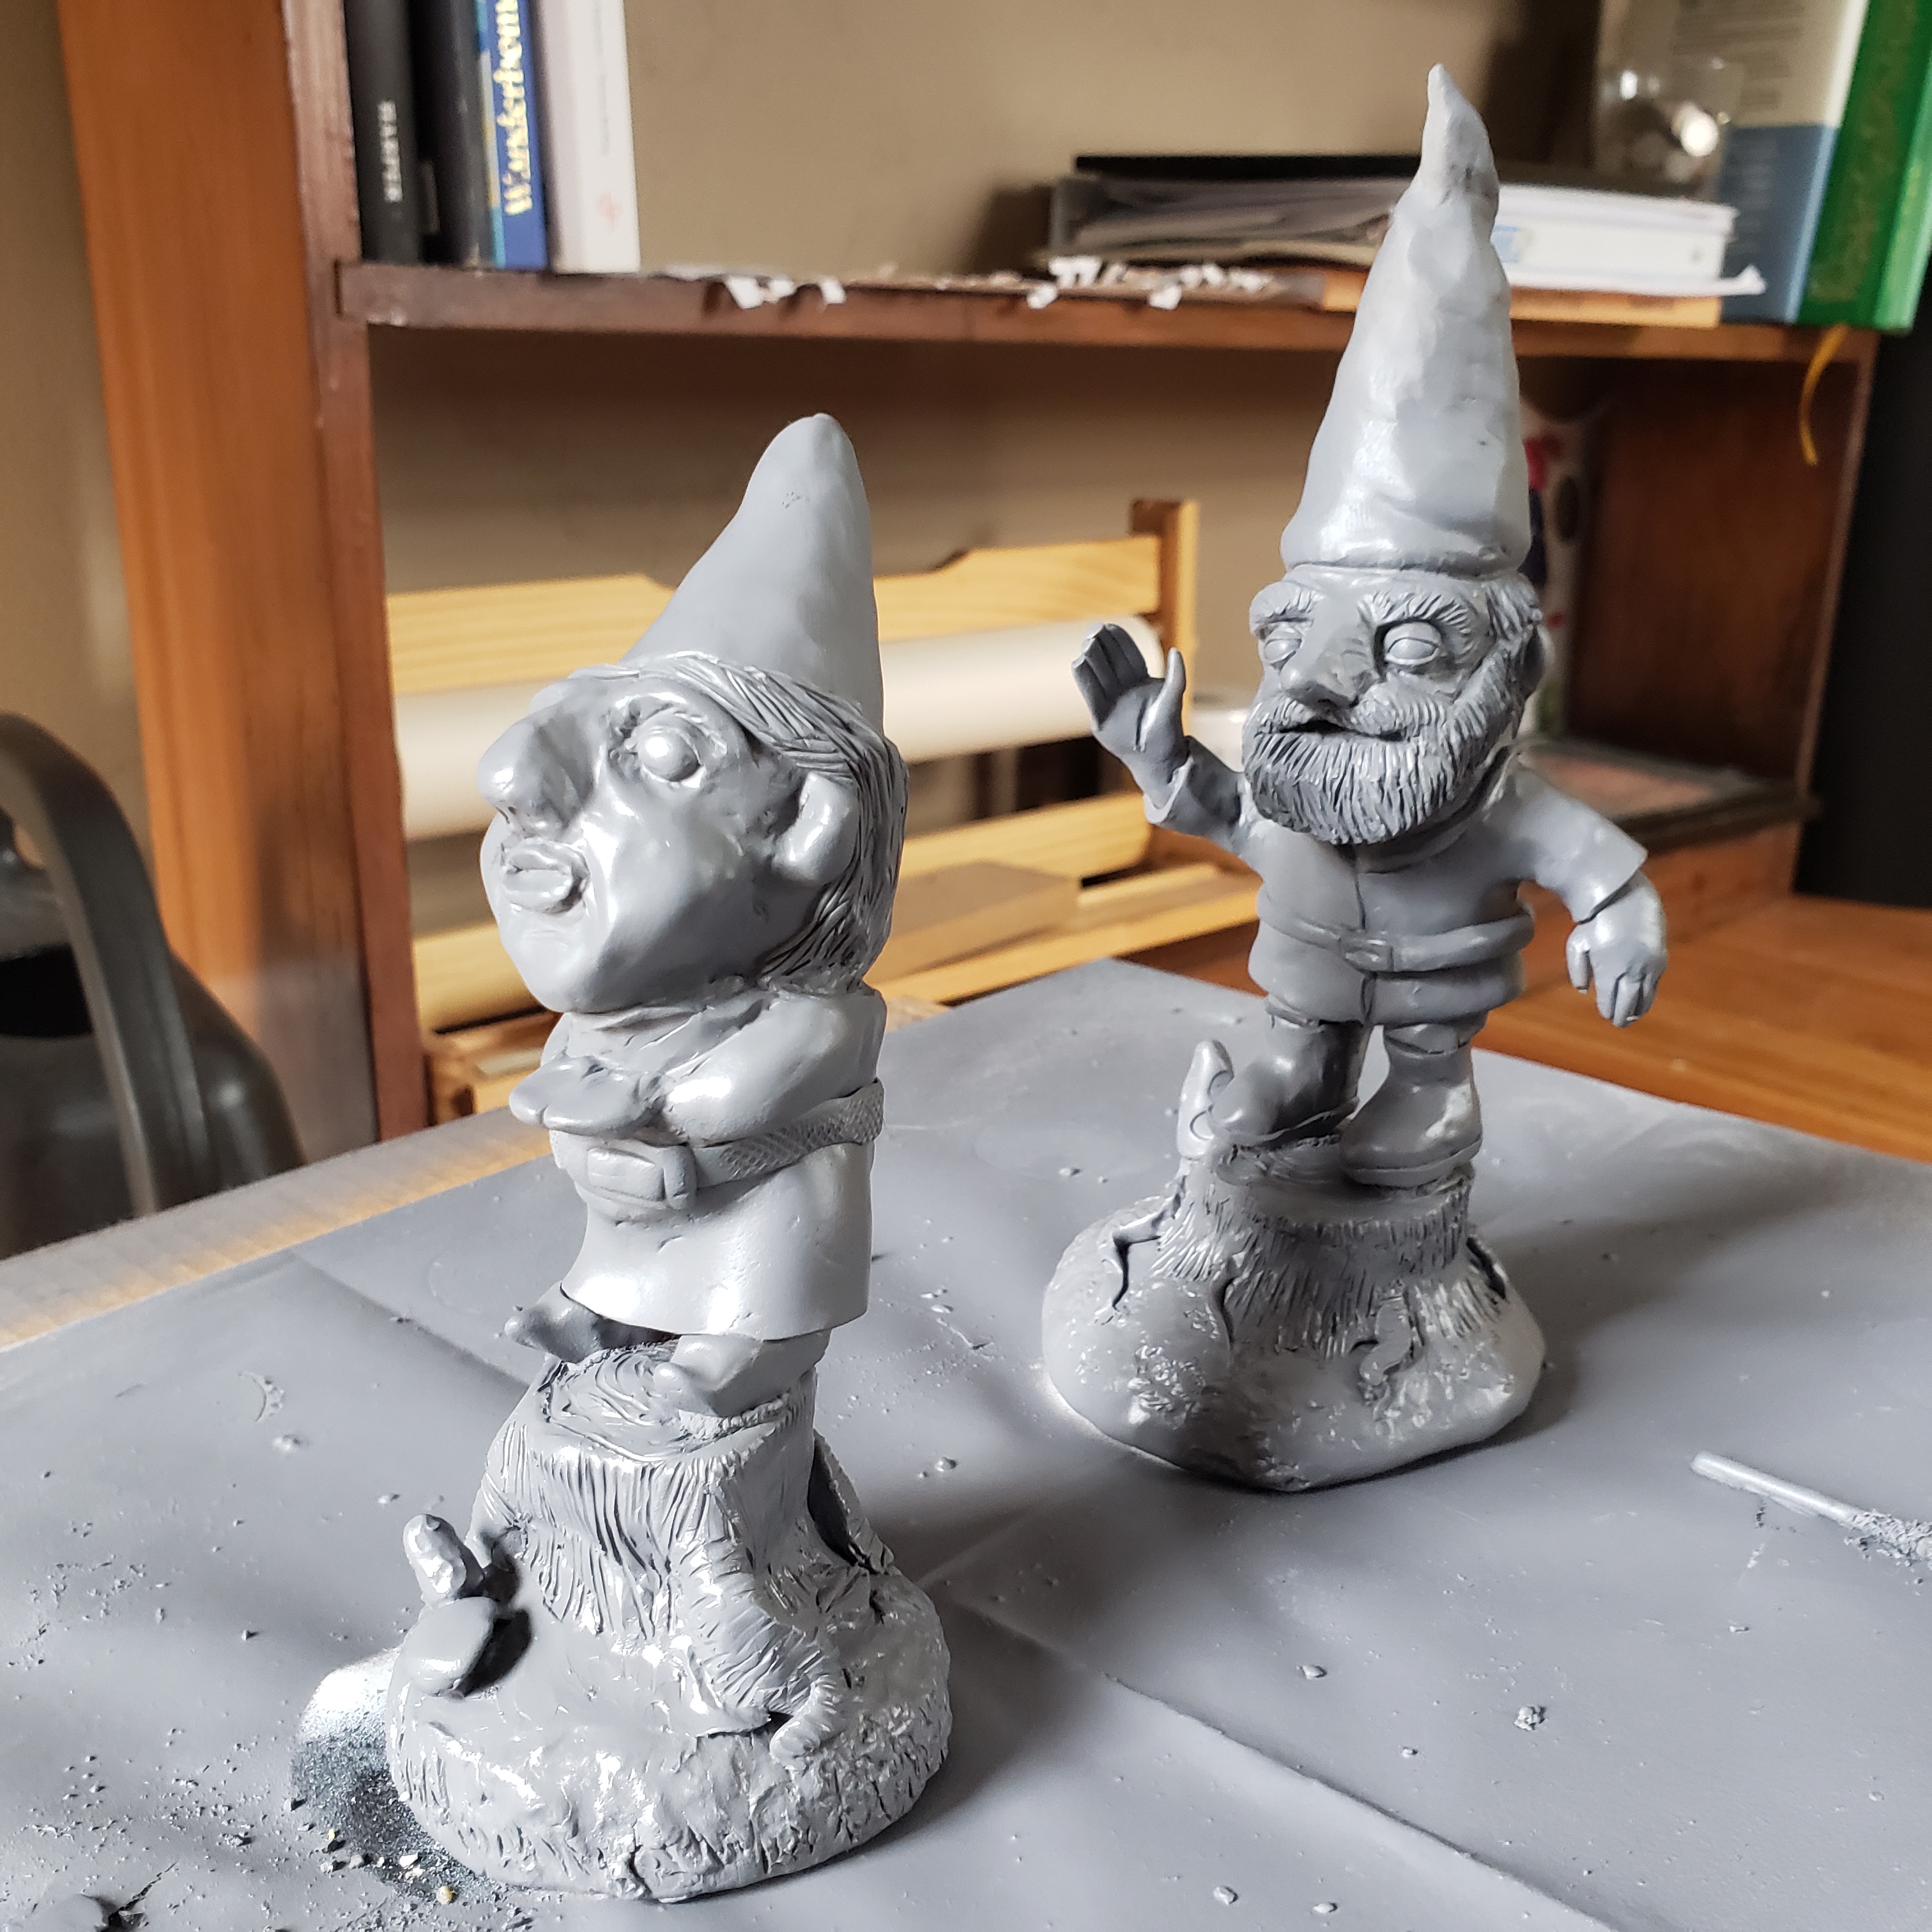 A pair of primed gnomes